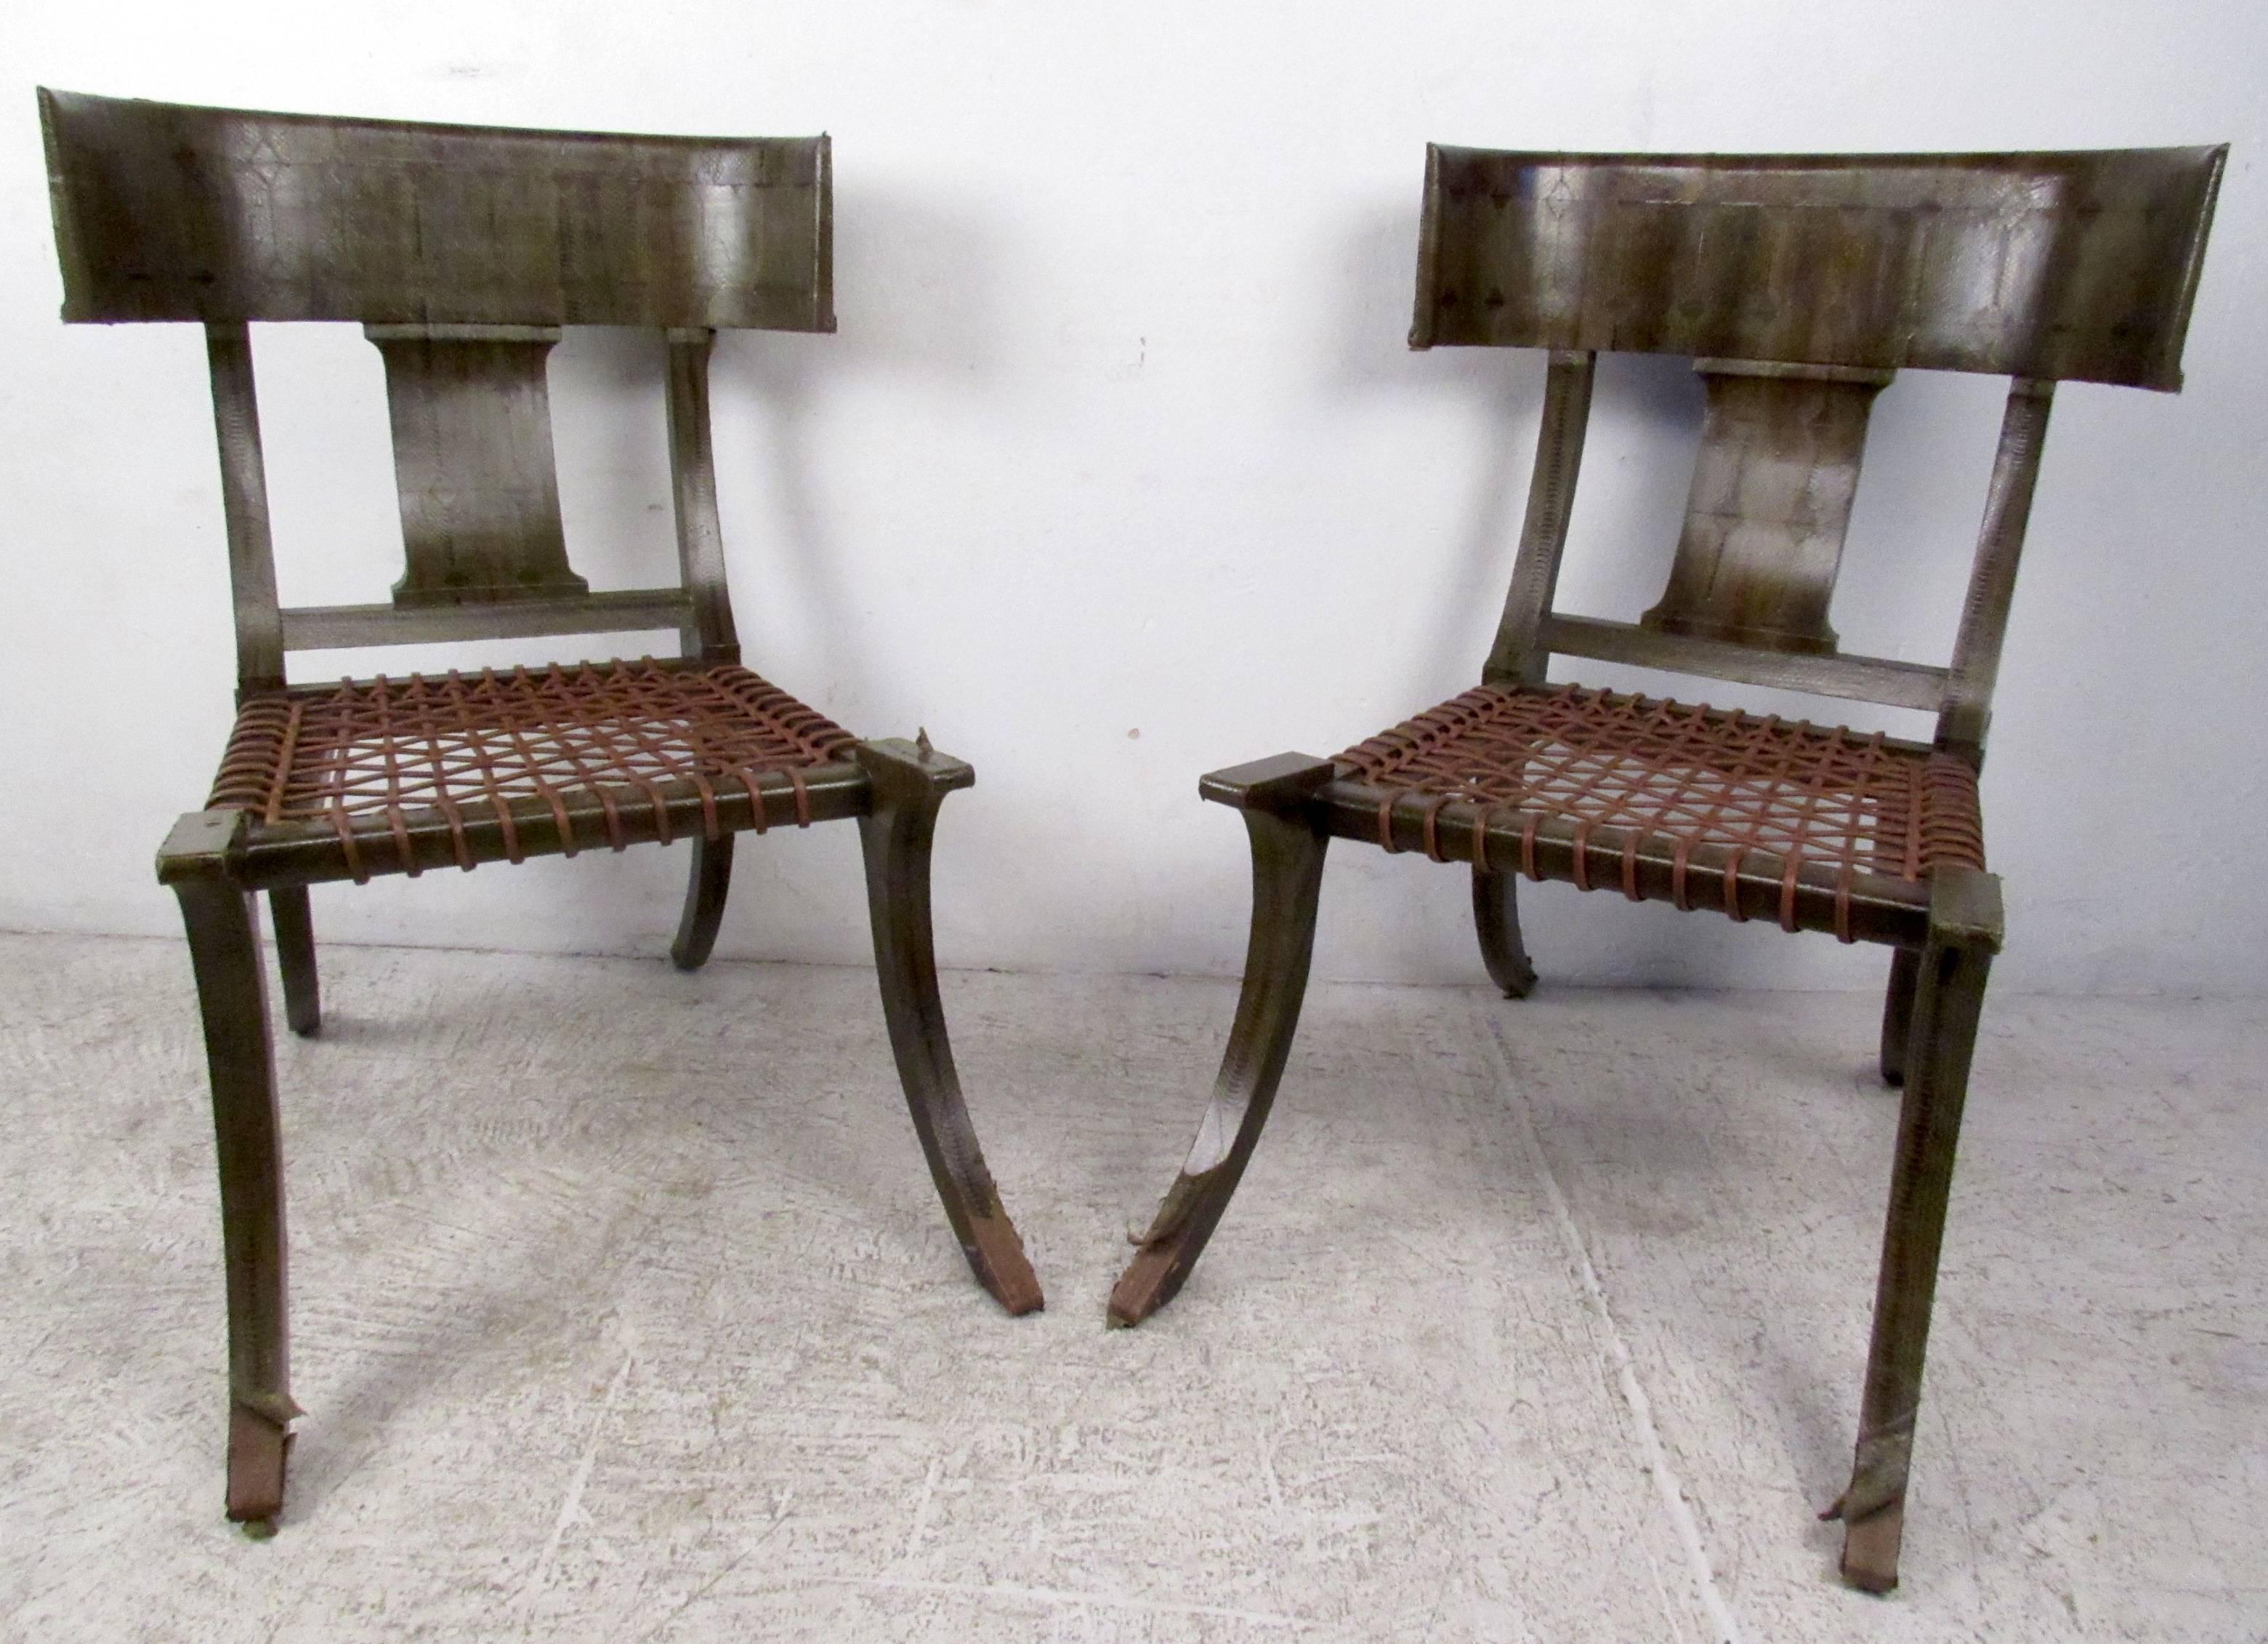 Two vintage-modern chairs featuring beautifully sculpted bodies with snake skin finish. Impressive matched pair of vintage Klismos chairs feature the mid-century style of Robsjohn-Gibbings, and make a memorable addition to any interior.

Please